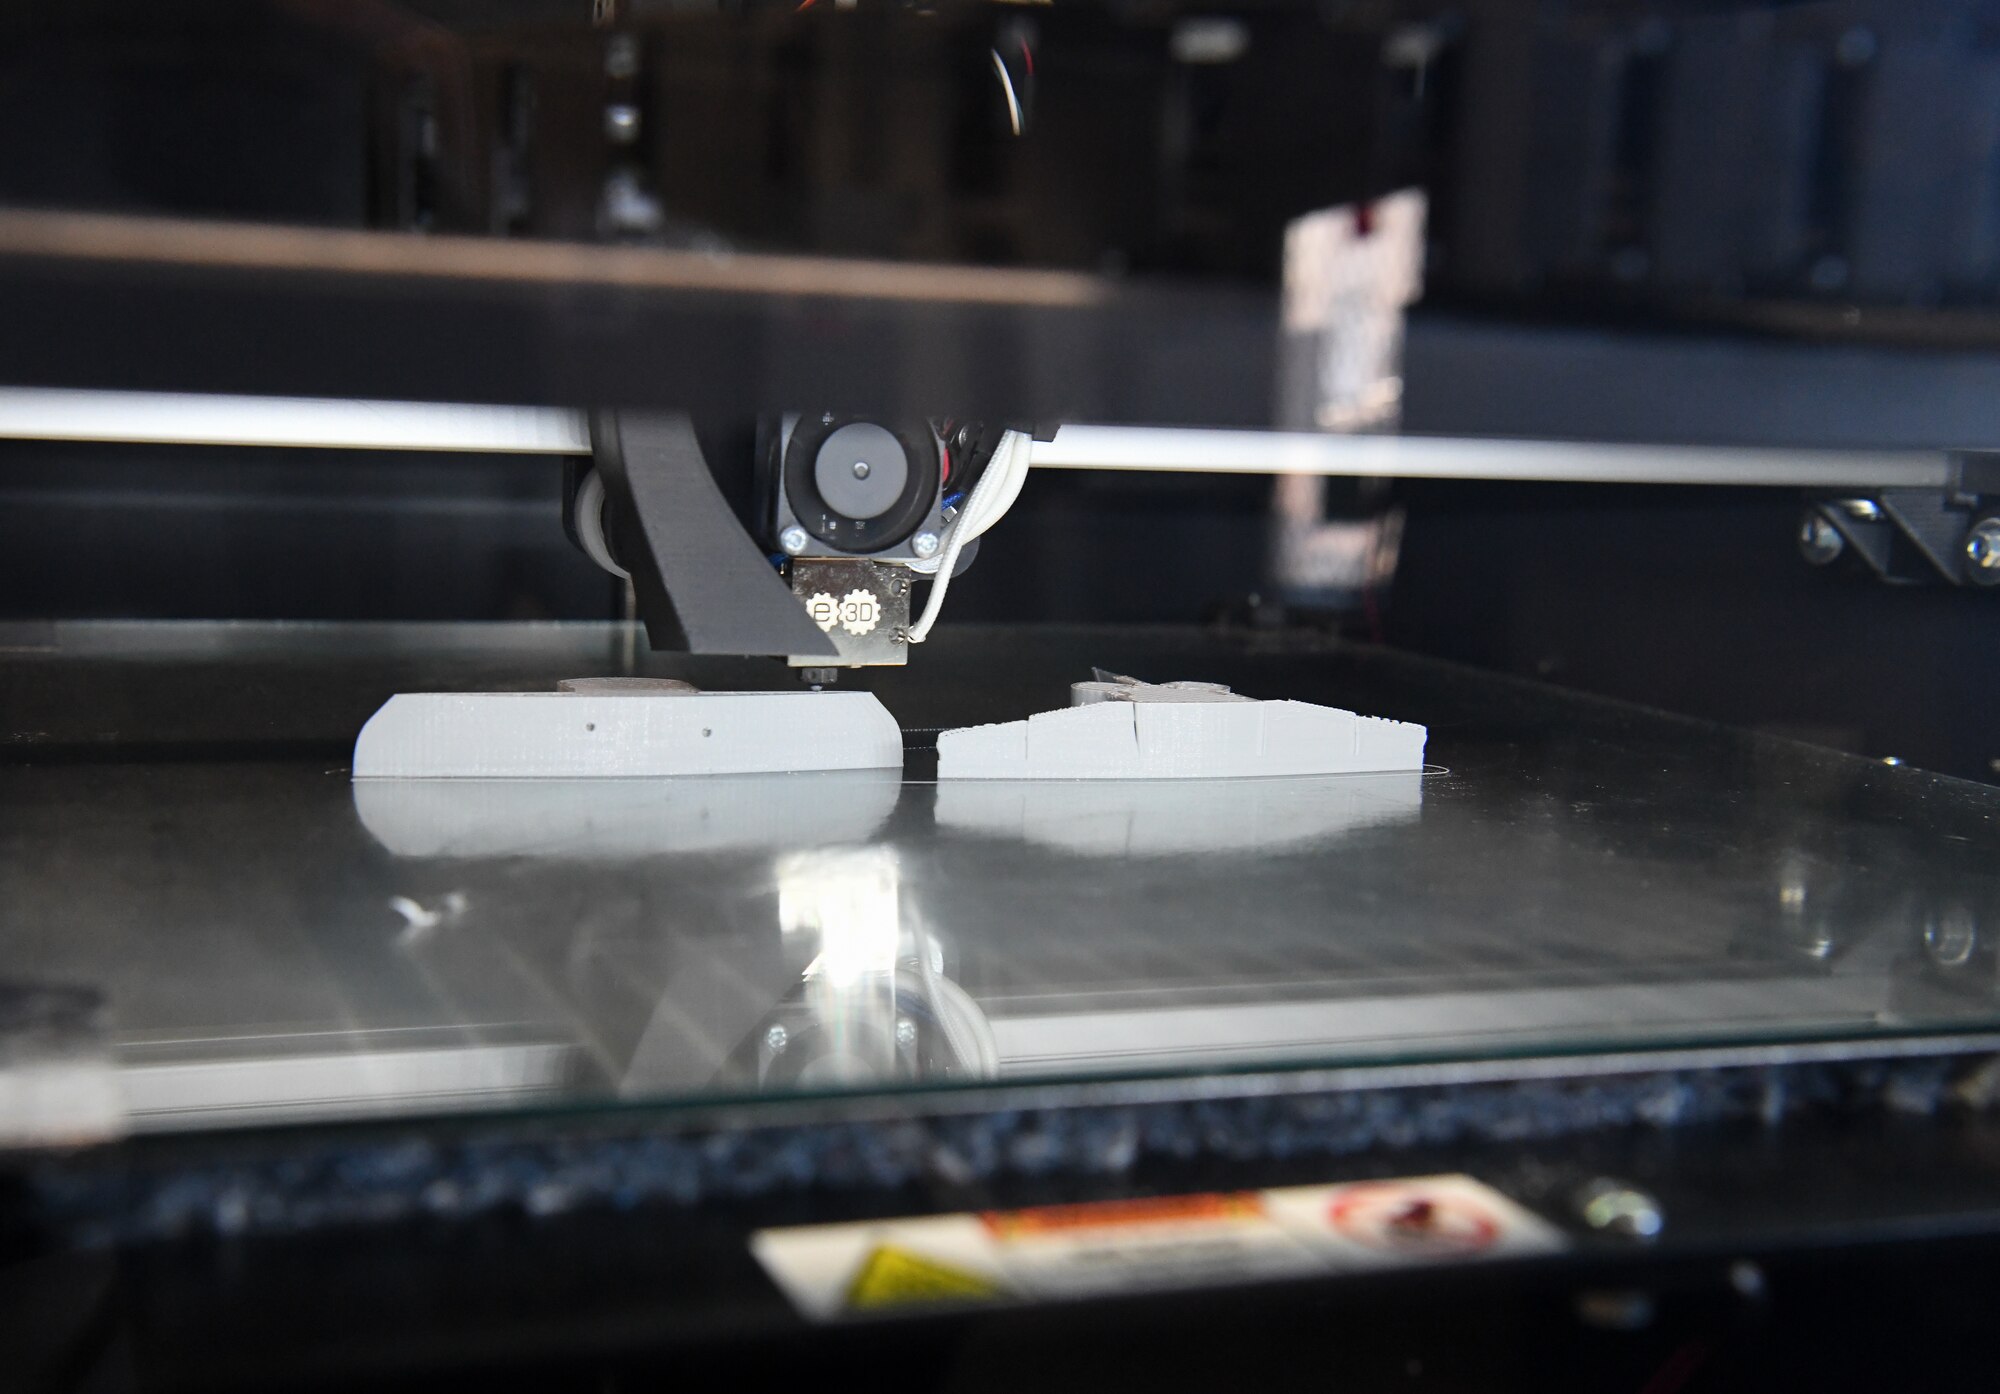 A test model is printed by a 3D printer in the Arnold Engineering Development Complex Innovation Center at Arnold Air Force Base, Tenn., Sept. 29, 2021. The 3D printer will provide engineers a way to efficiently and economically create models for research. (U.S. Air Force photo by Jill Pickett)